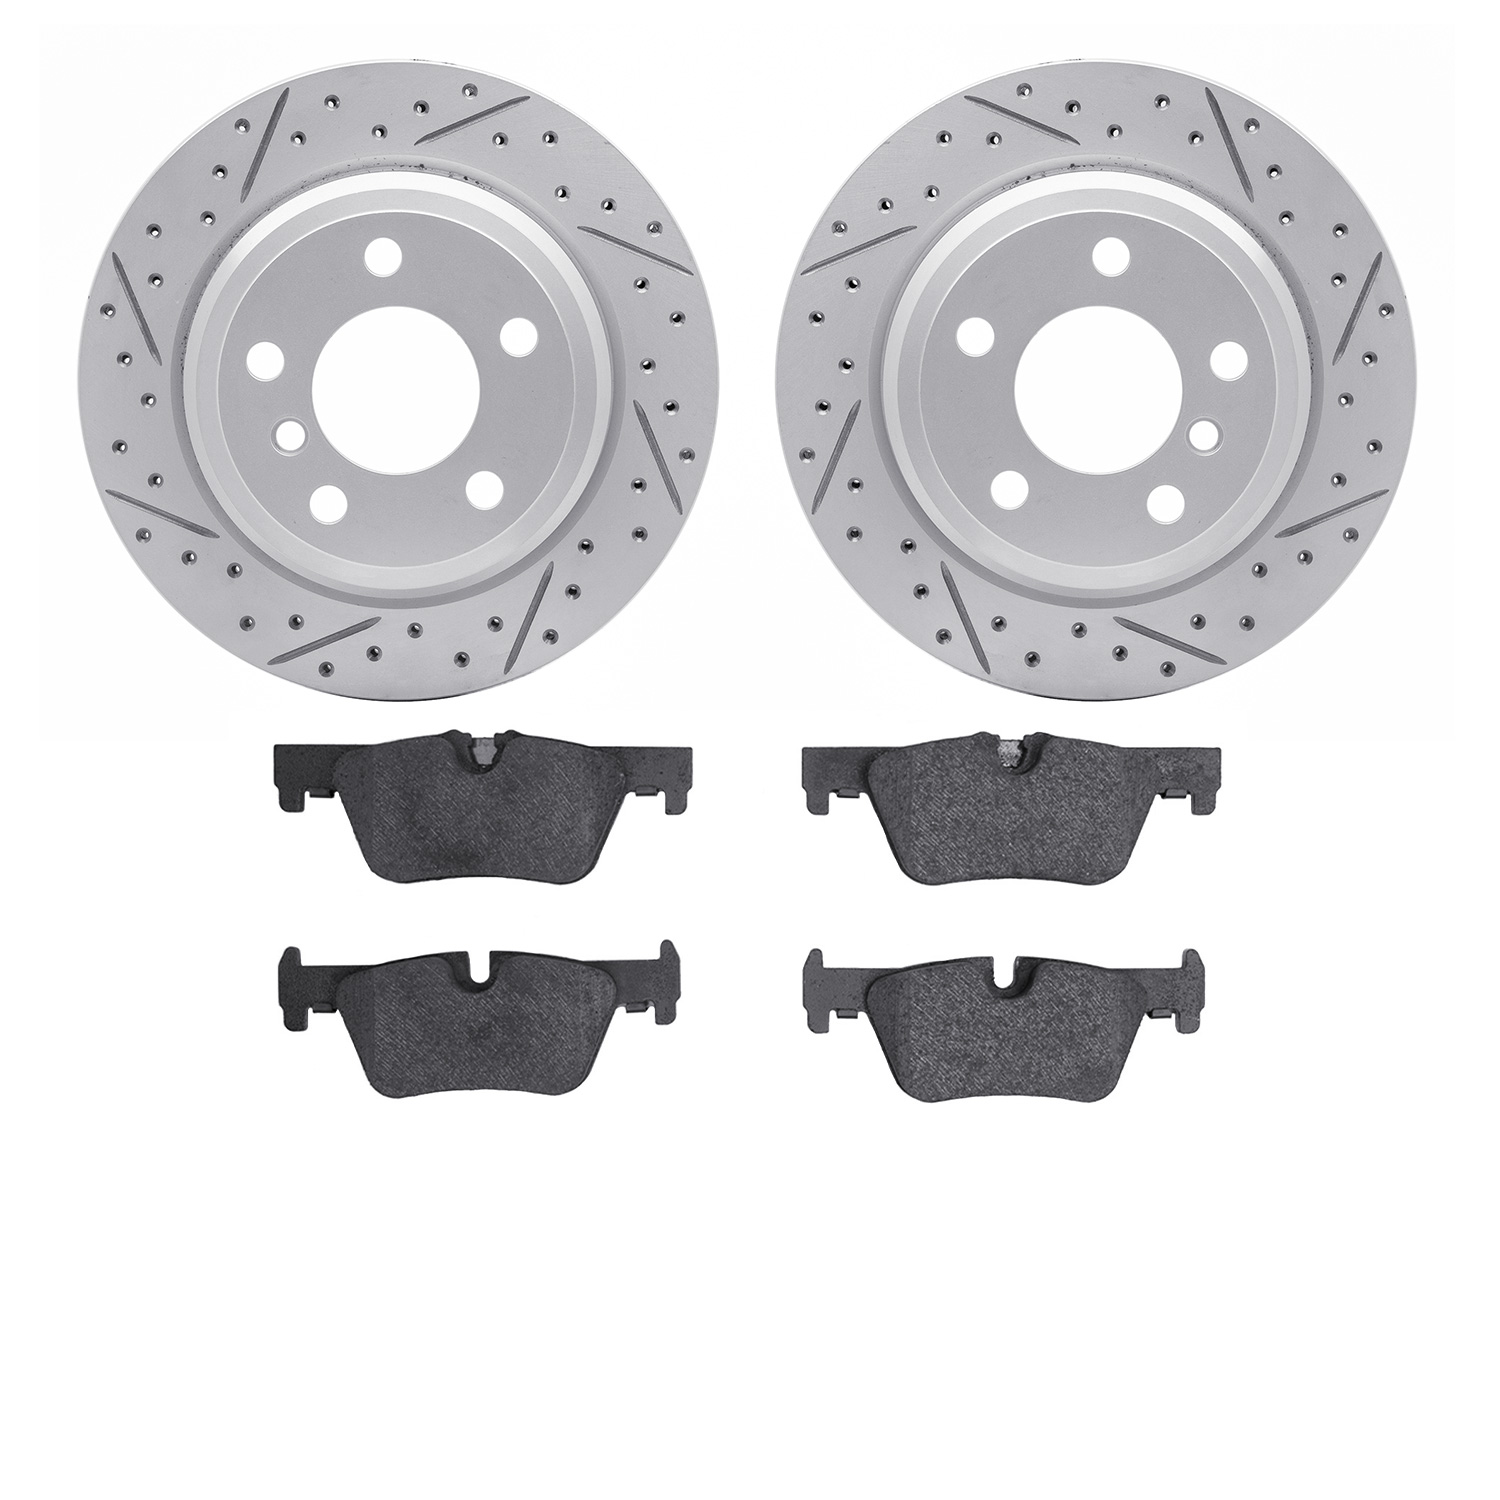 2502-31101 Geoperformance Drilled/Slotted Rotors w/5000 Advanced Brake Pads Kit, 2013-2020 BMW, Position: Rear